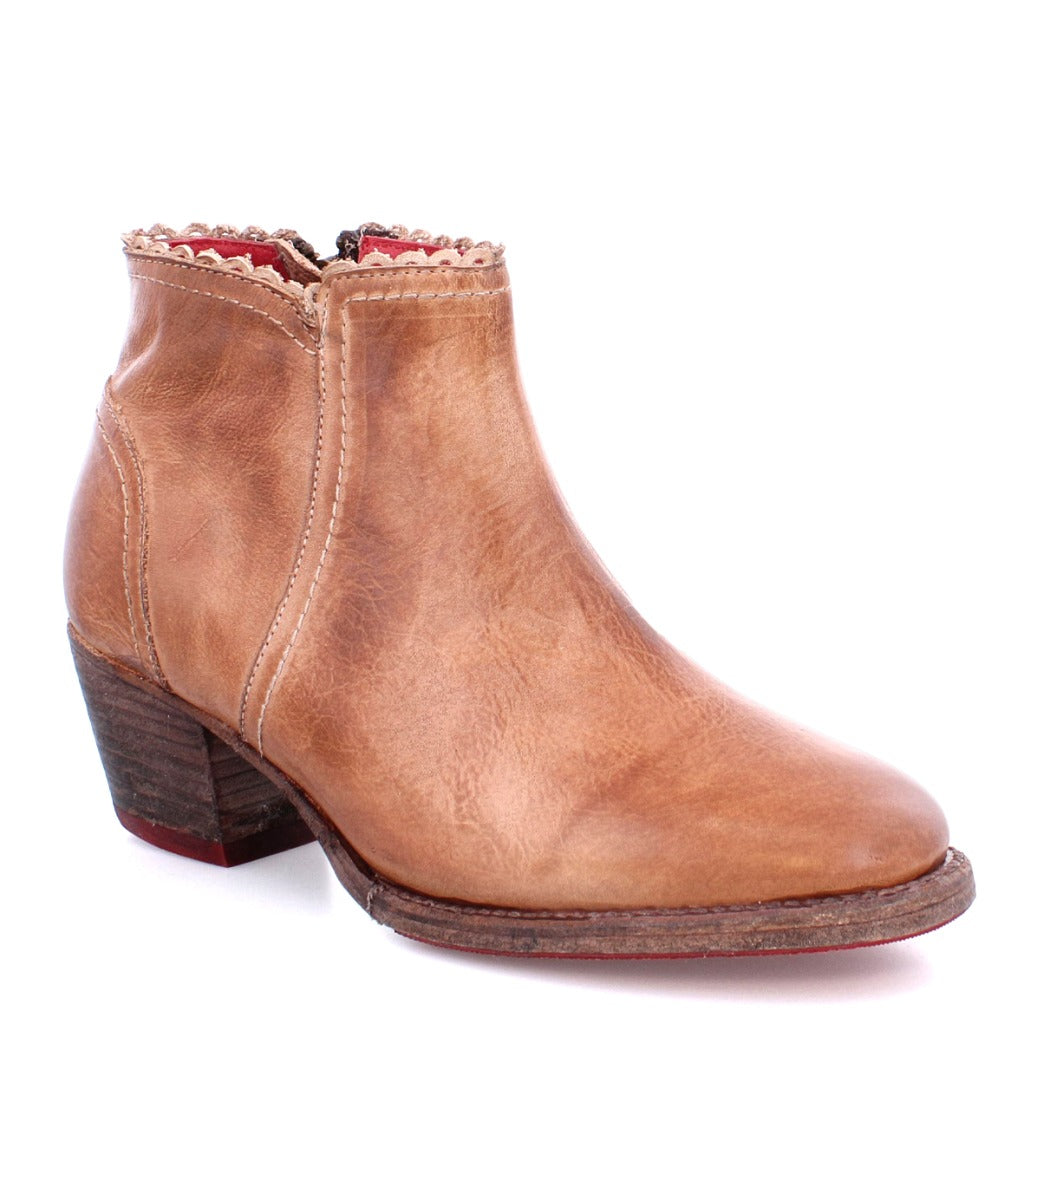 A women's Oak Tree Farms Mini leather short boot in tan, featuring a comfortable stacked heel.